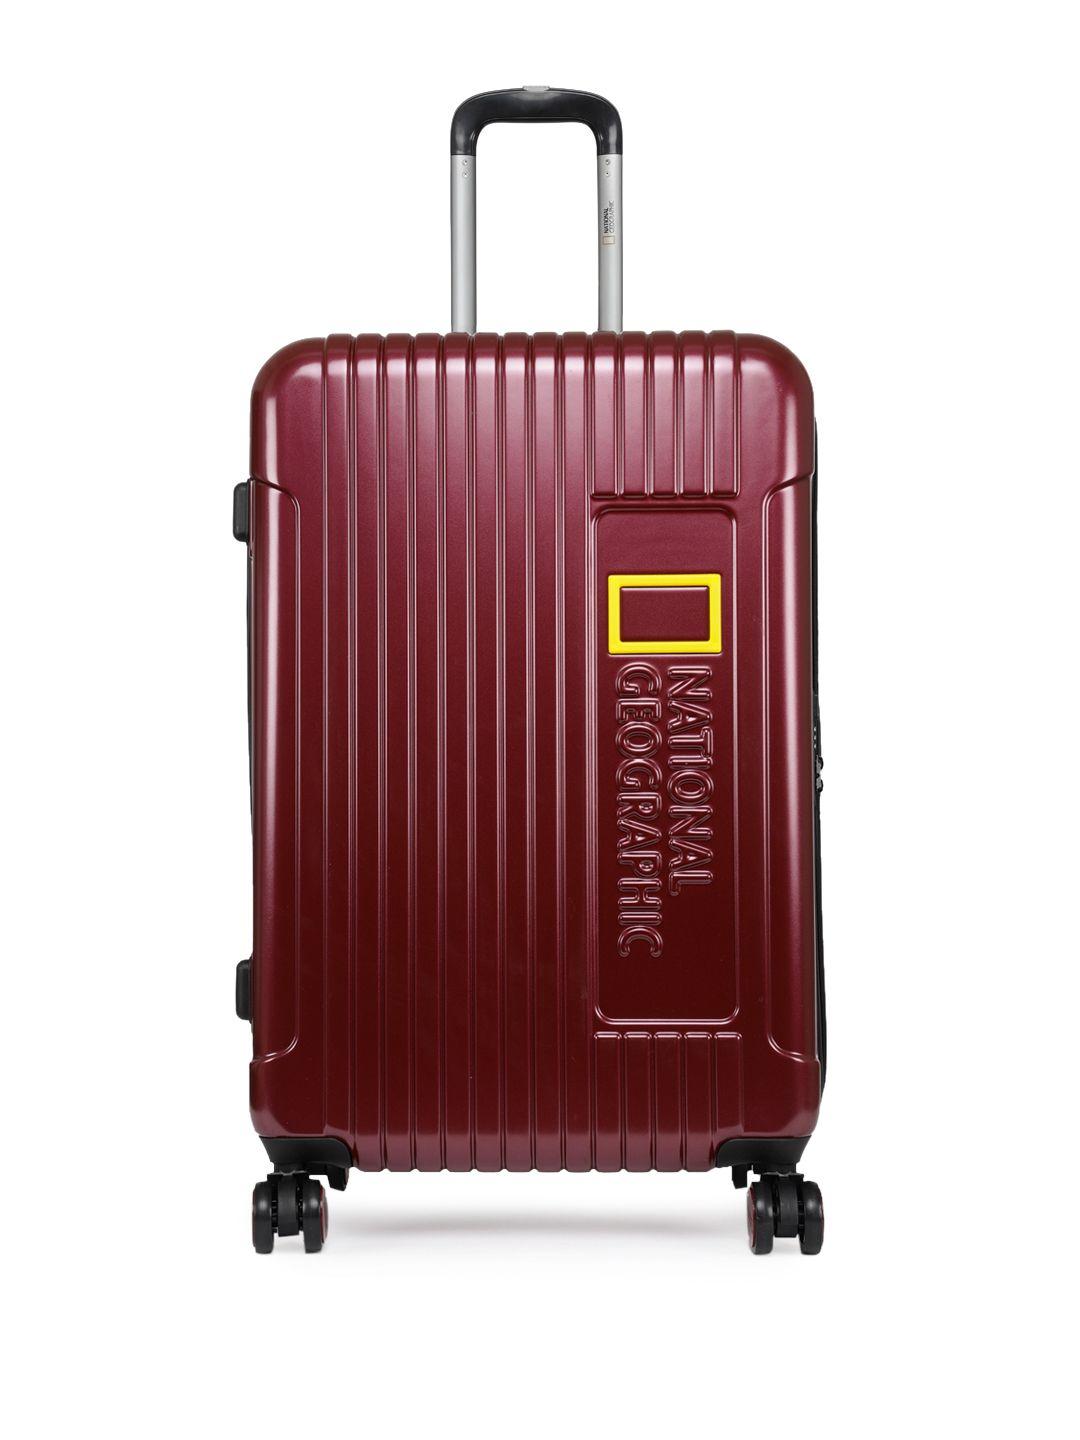 national geographic canyon large trolley bag -71 cm